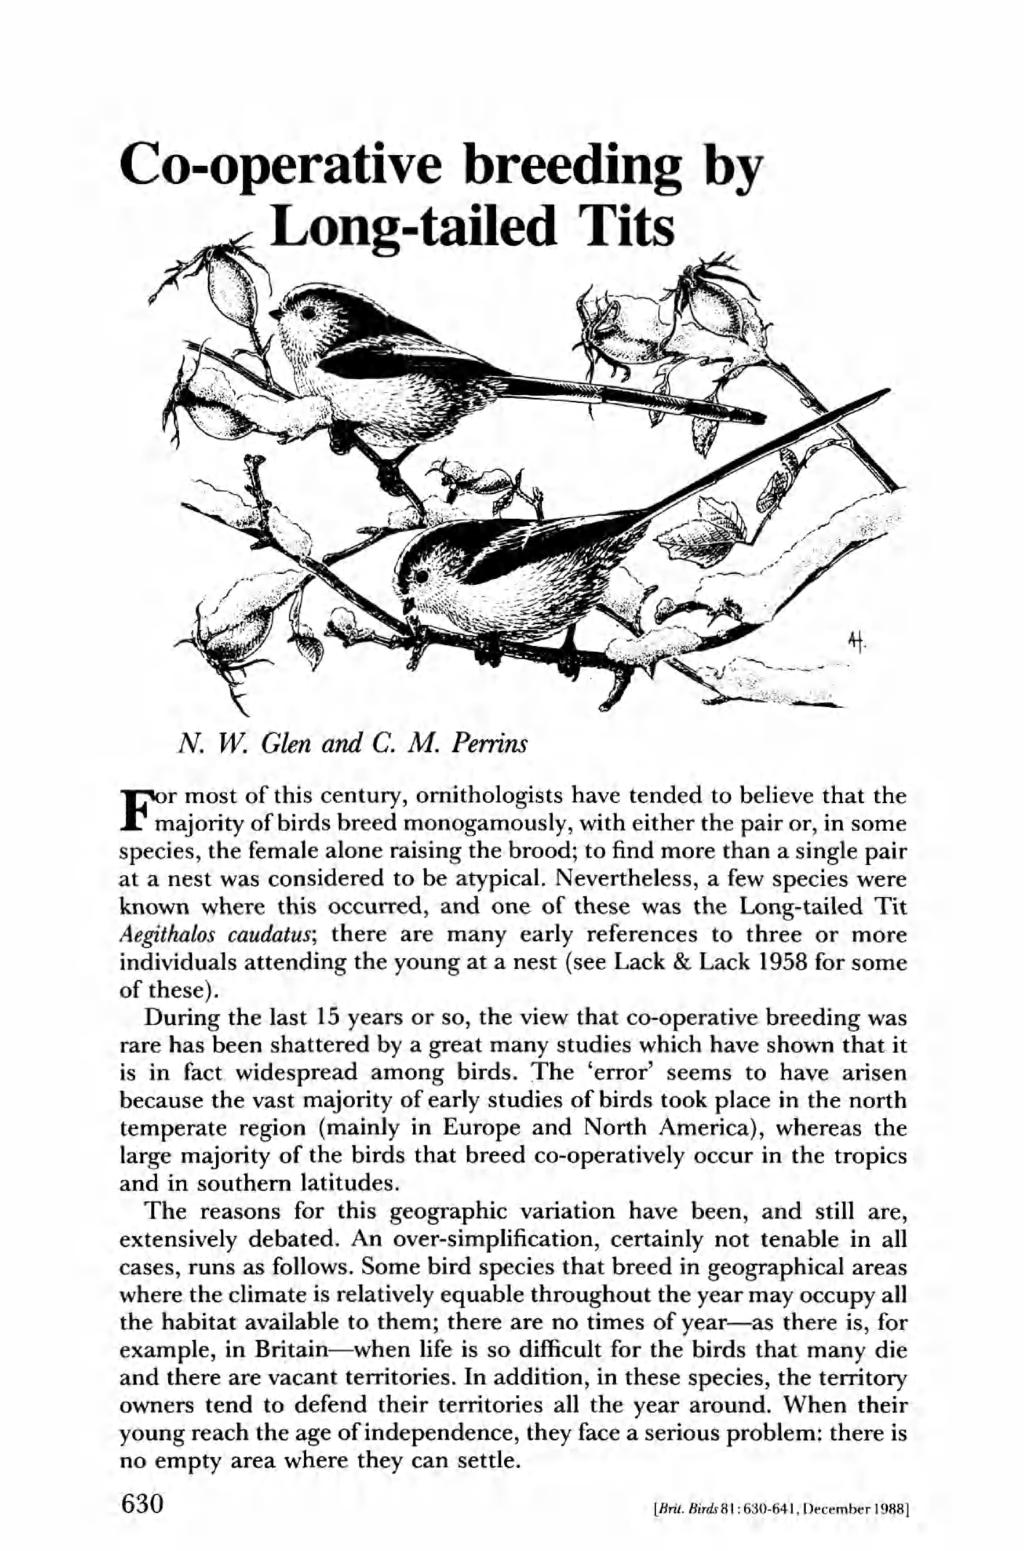 Co-operative breeding by Long-tailed Tits v N. W. Glen and C. M.